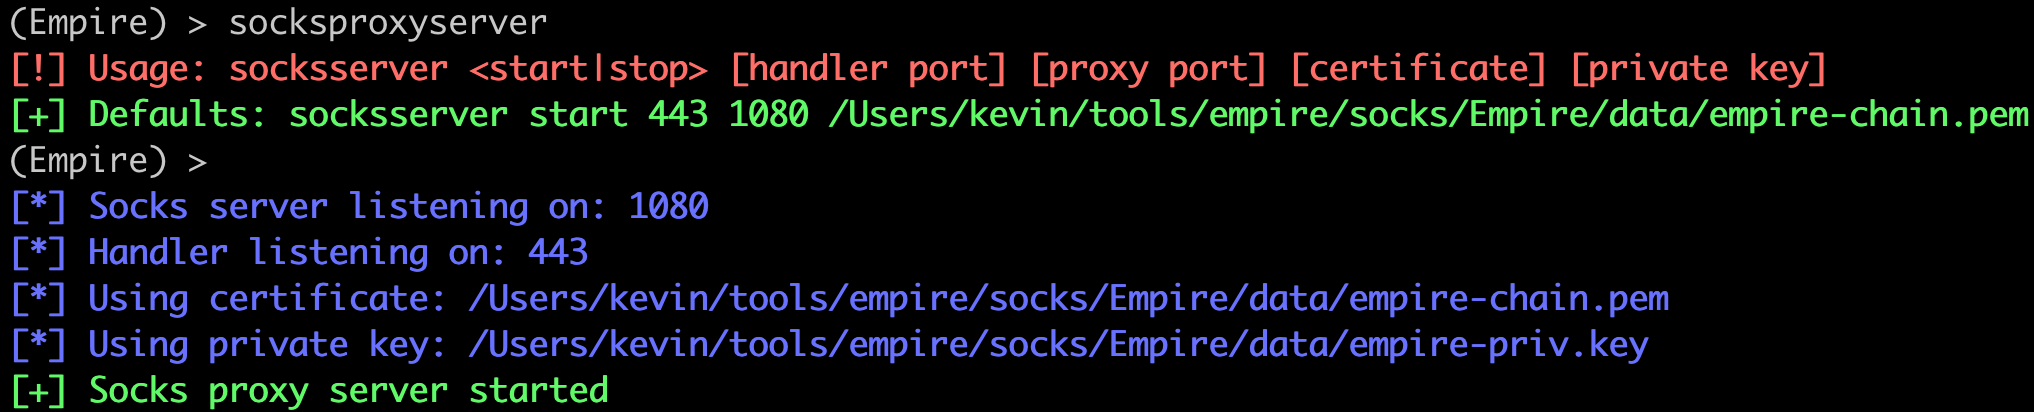 Starting the Socks server using our loaded plugin